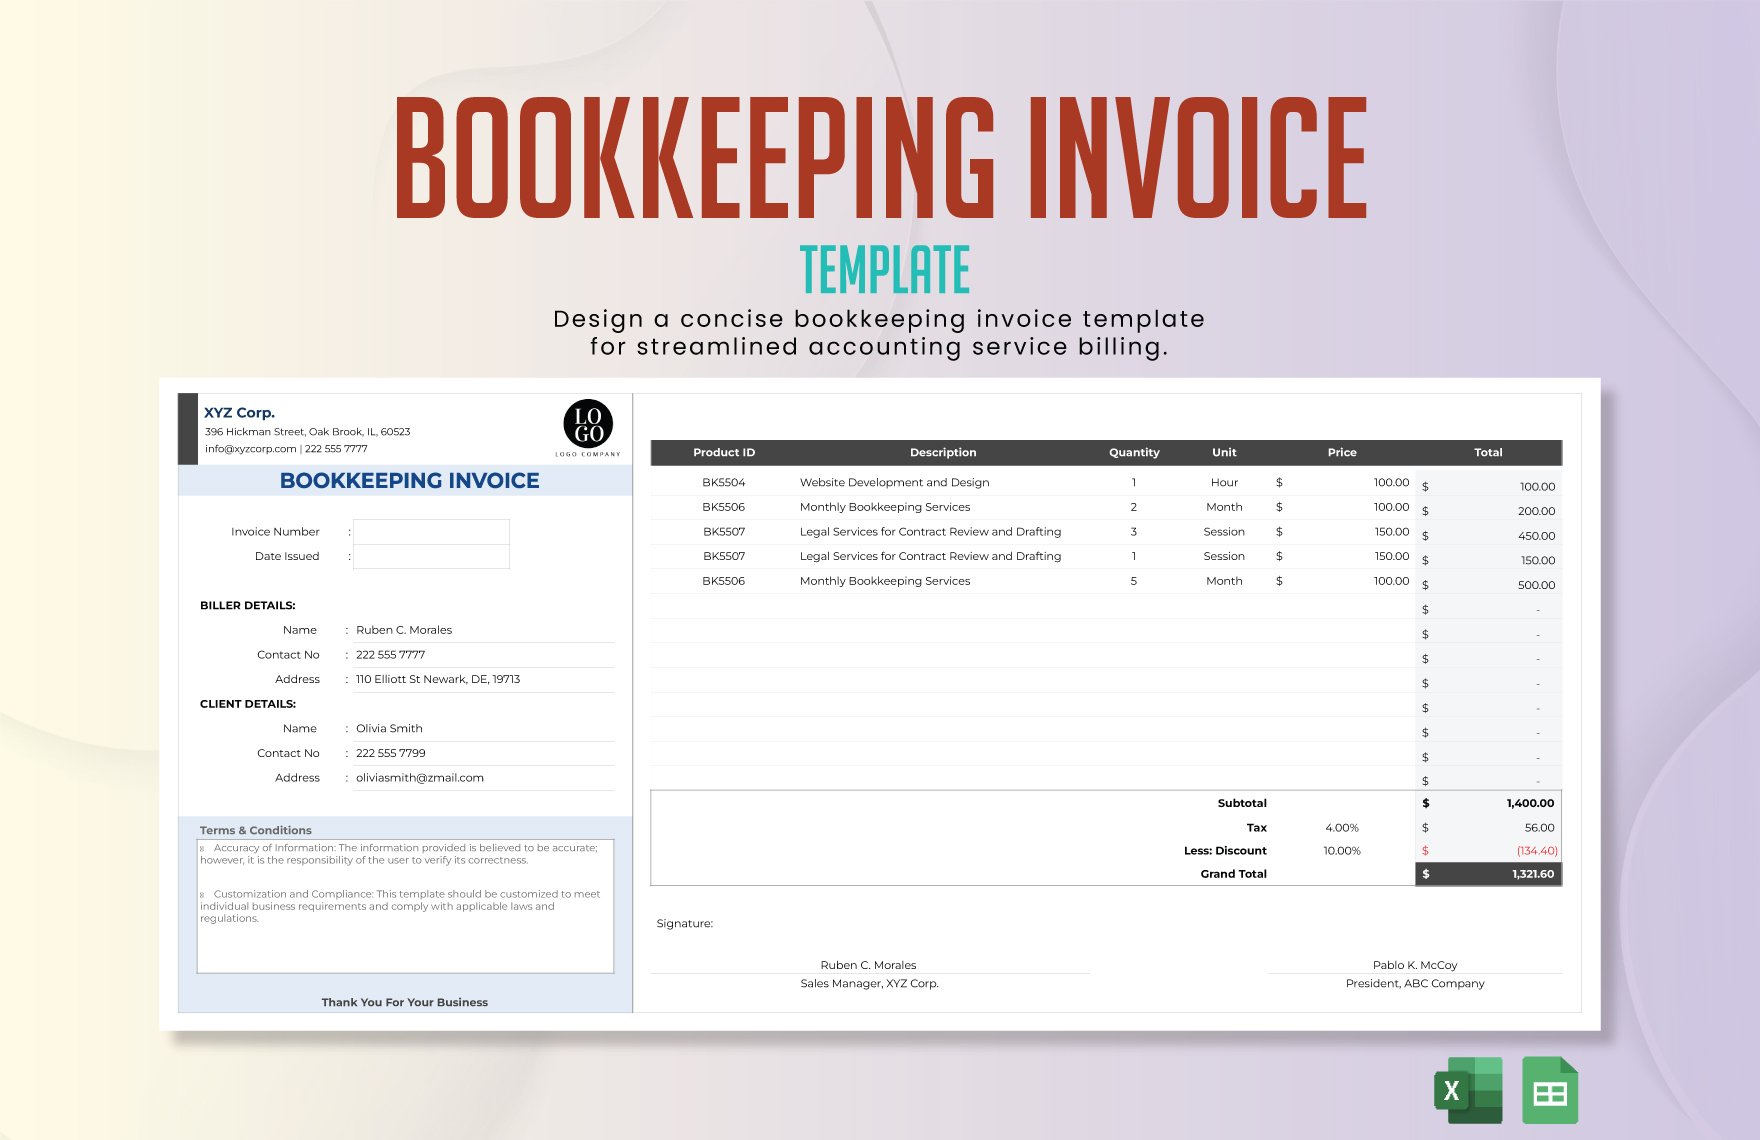 Bookkeeping Invoice Template in Excel, Google Sheets